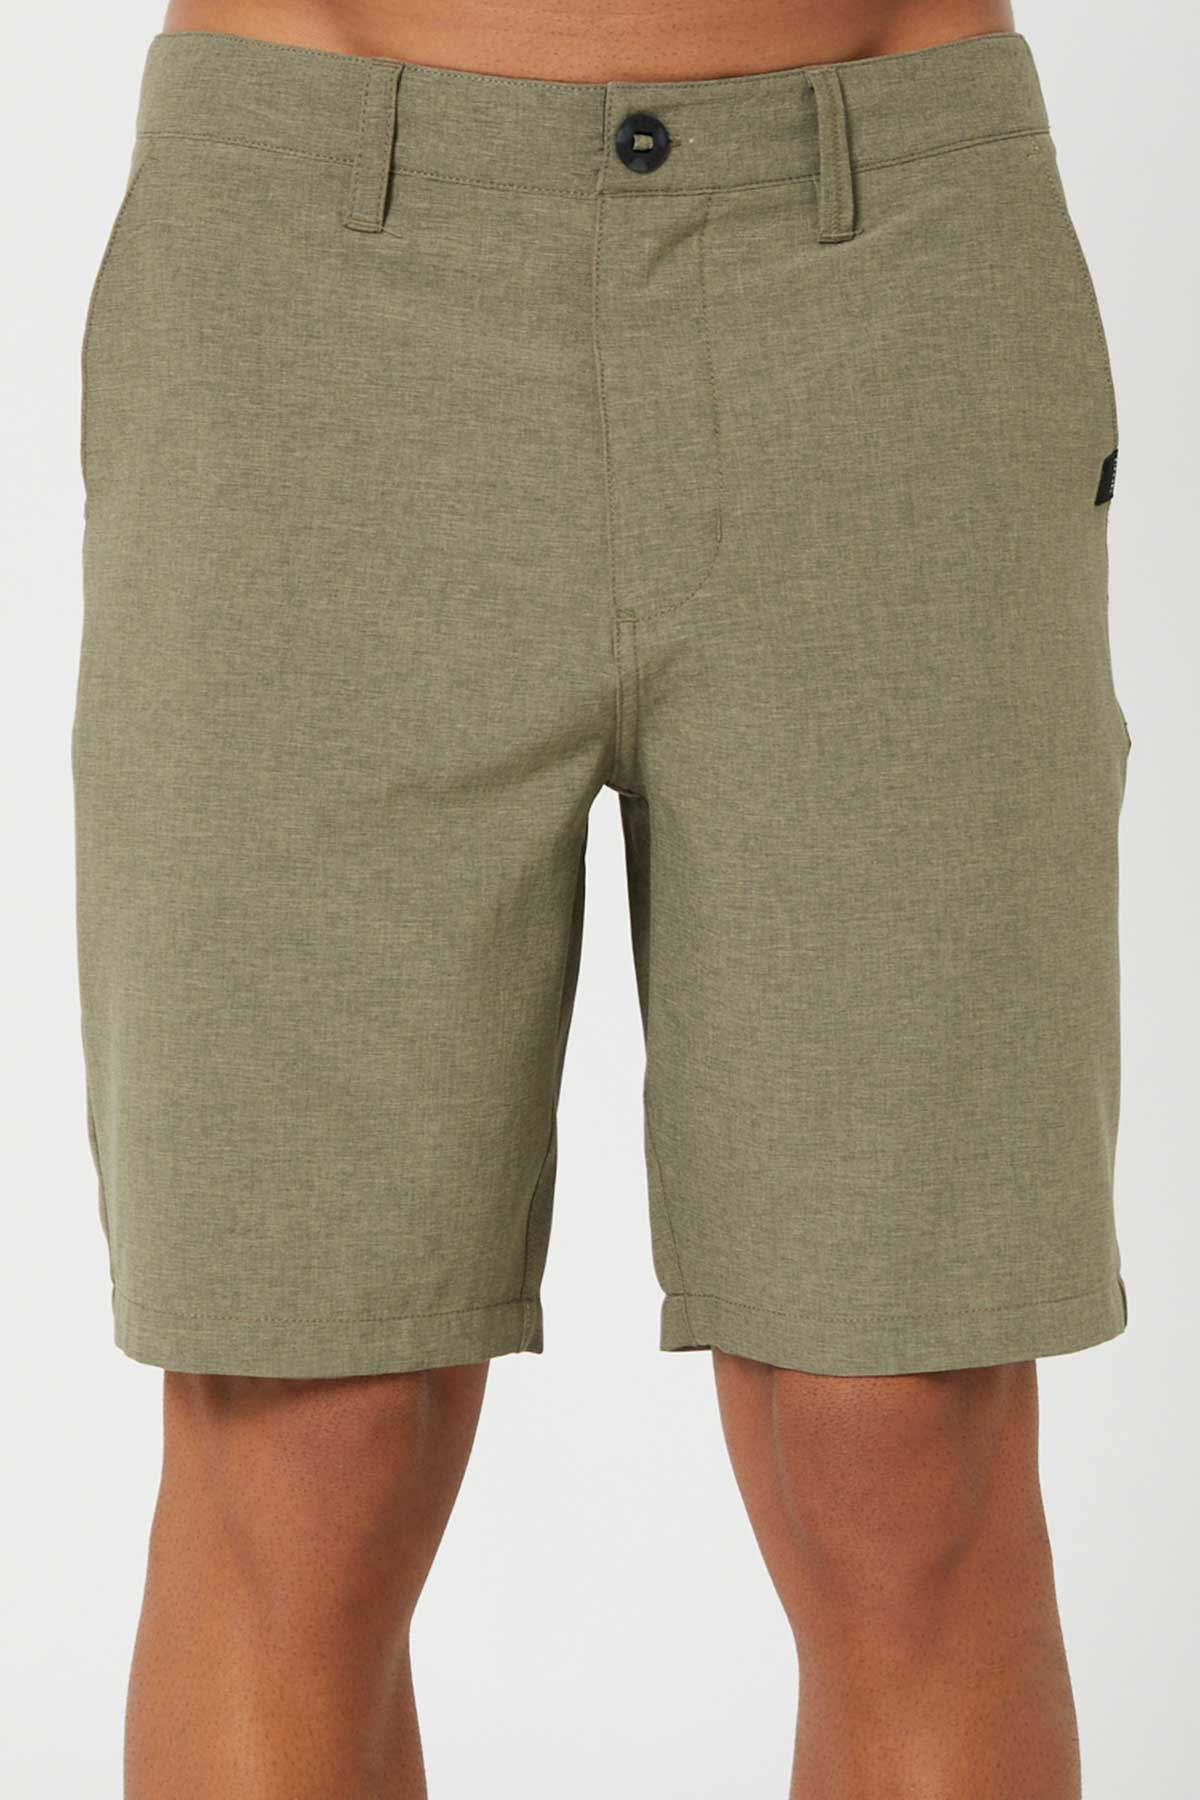 Rip Curl Mens Shorts Boardwalk Epic Mix in Washed Moss front